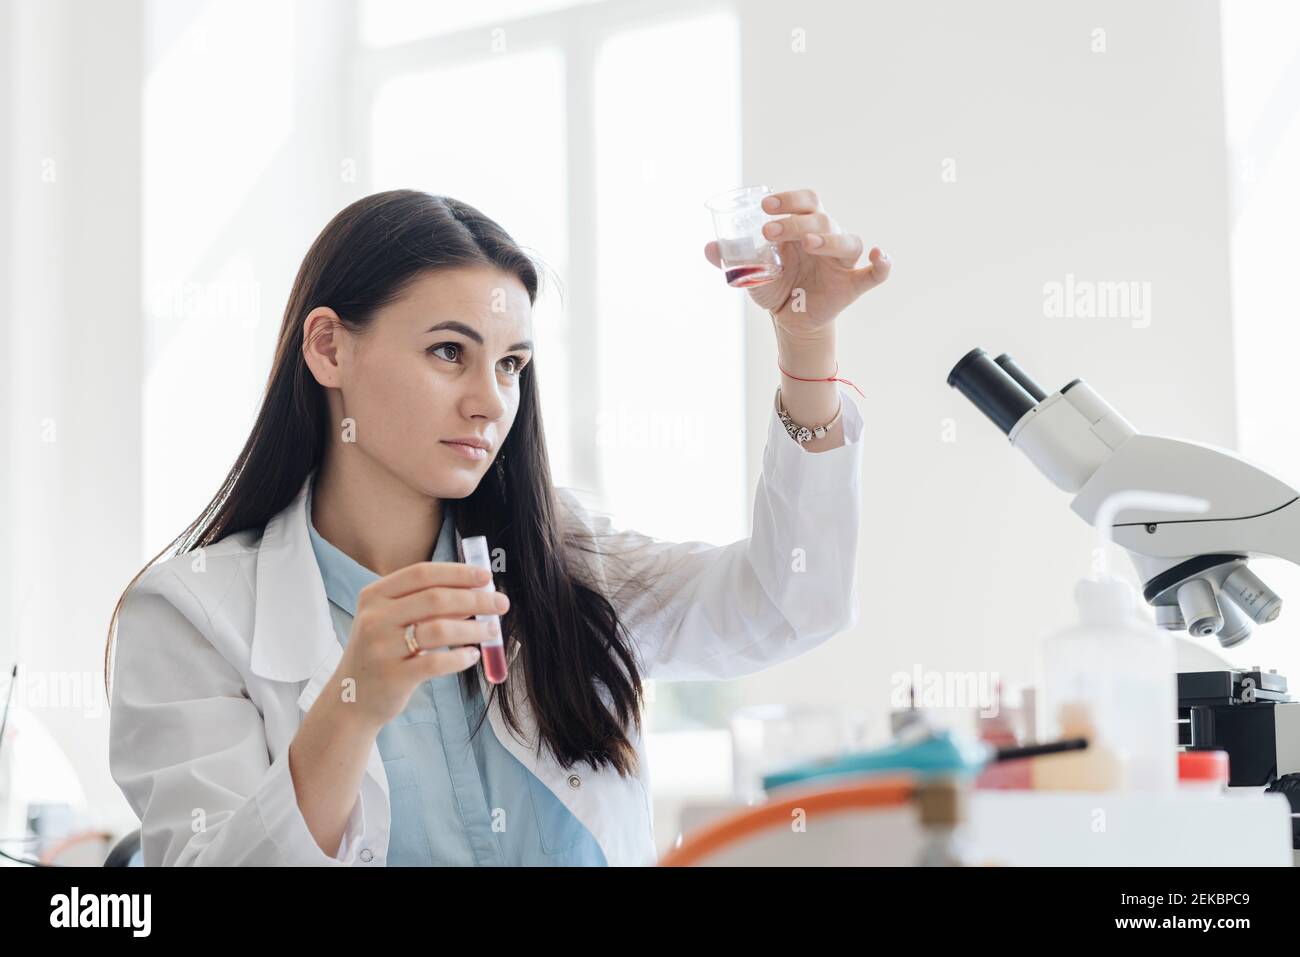 Young female researcher in white coat analyzing laboratory sample Stock Photo